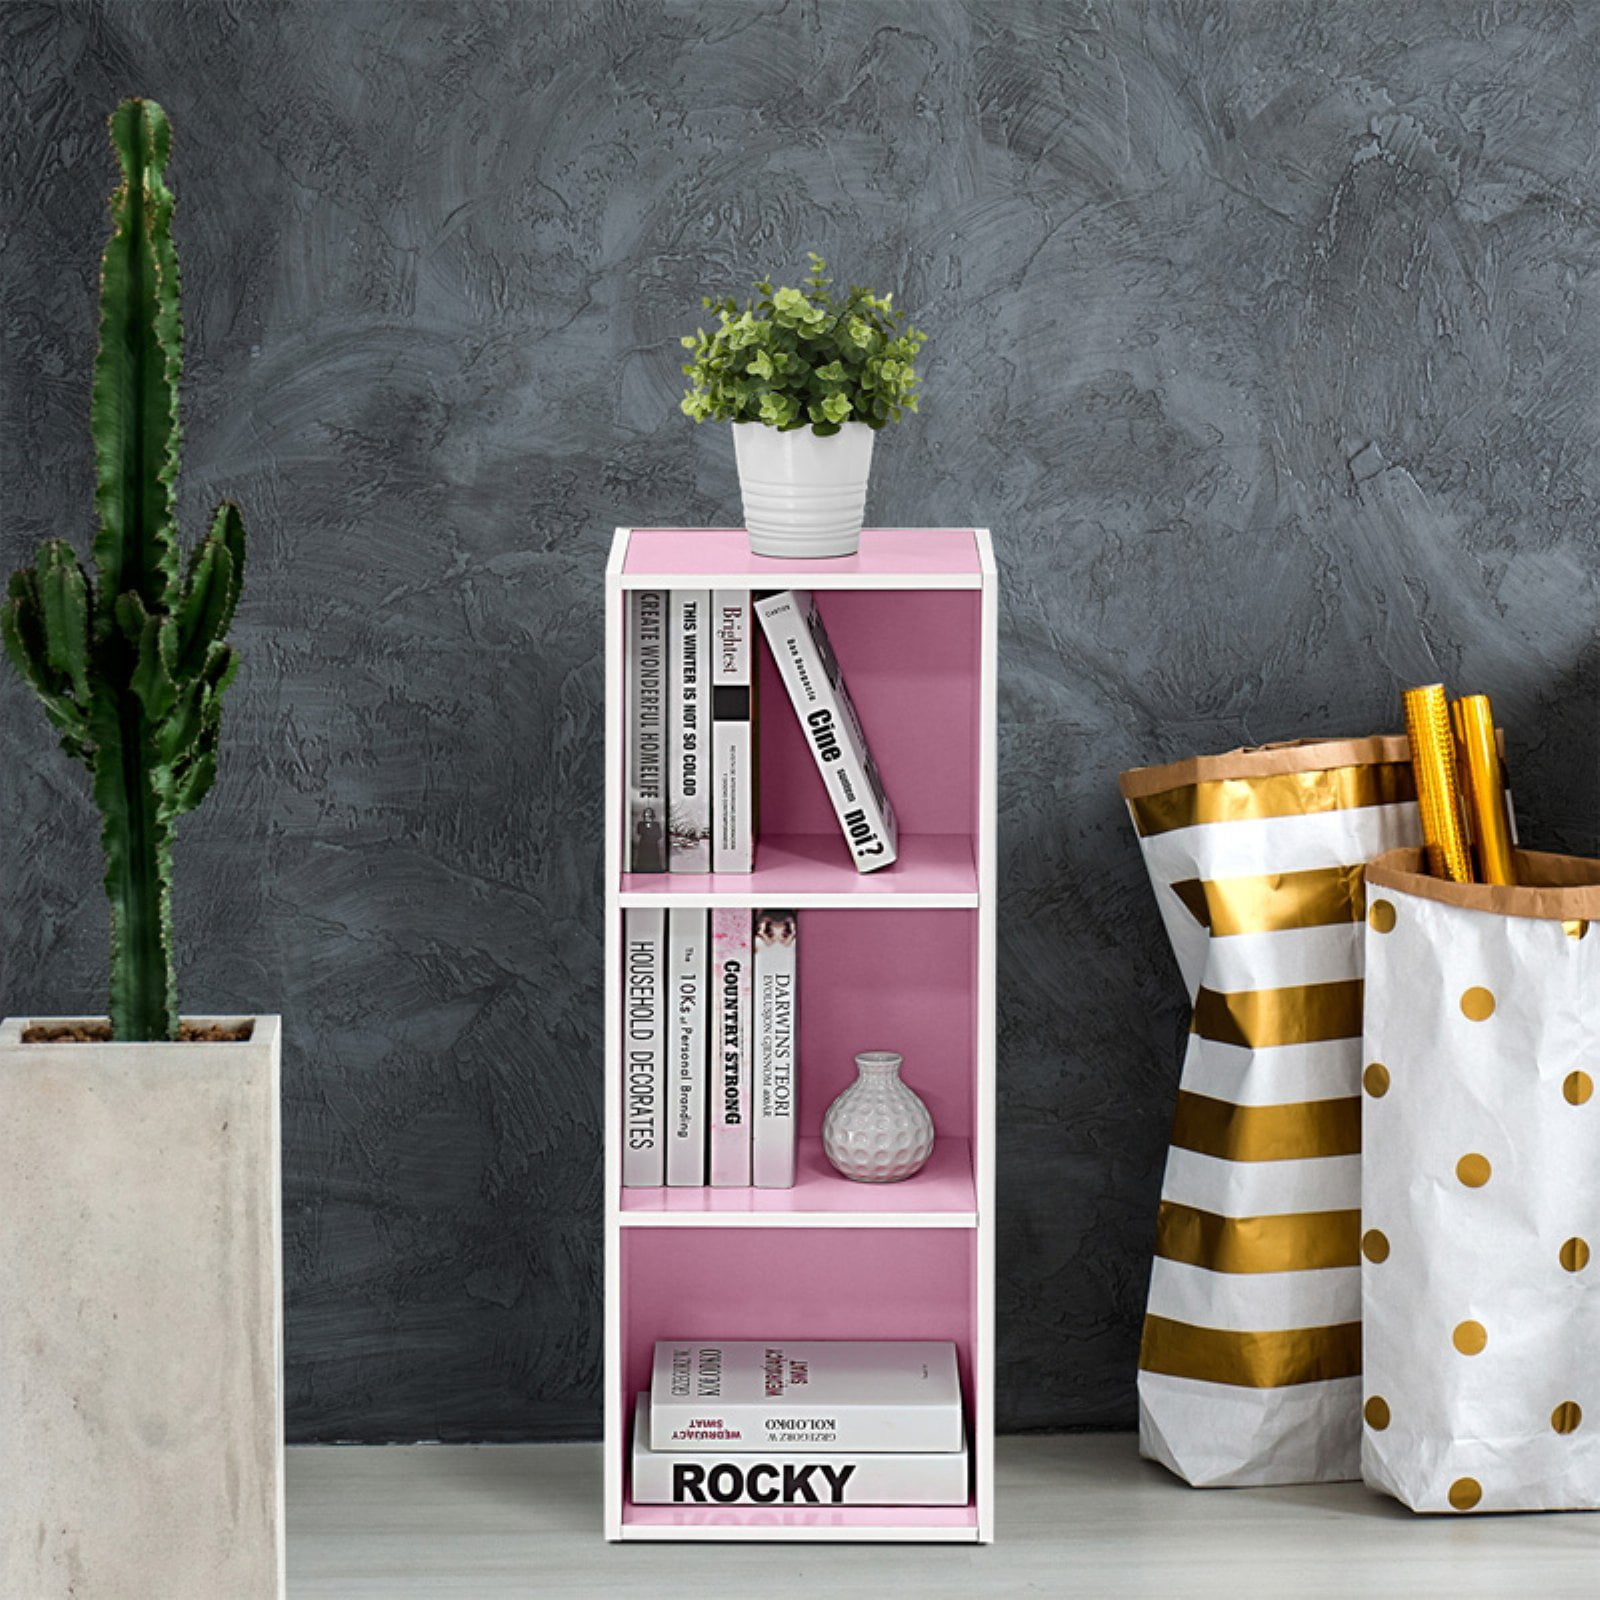 Furinno Luder Engineered Wood 3-Tier Open Shelf Bookcase in White/Pink